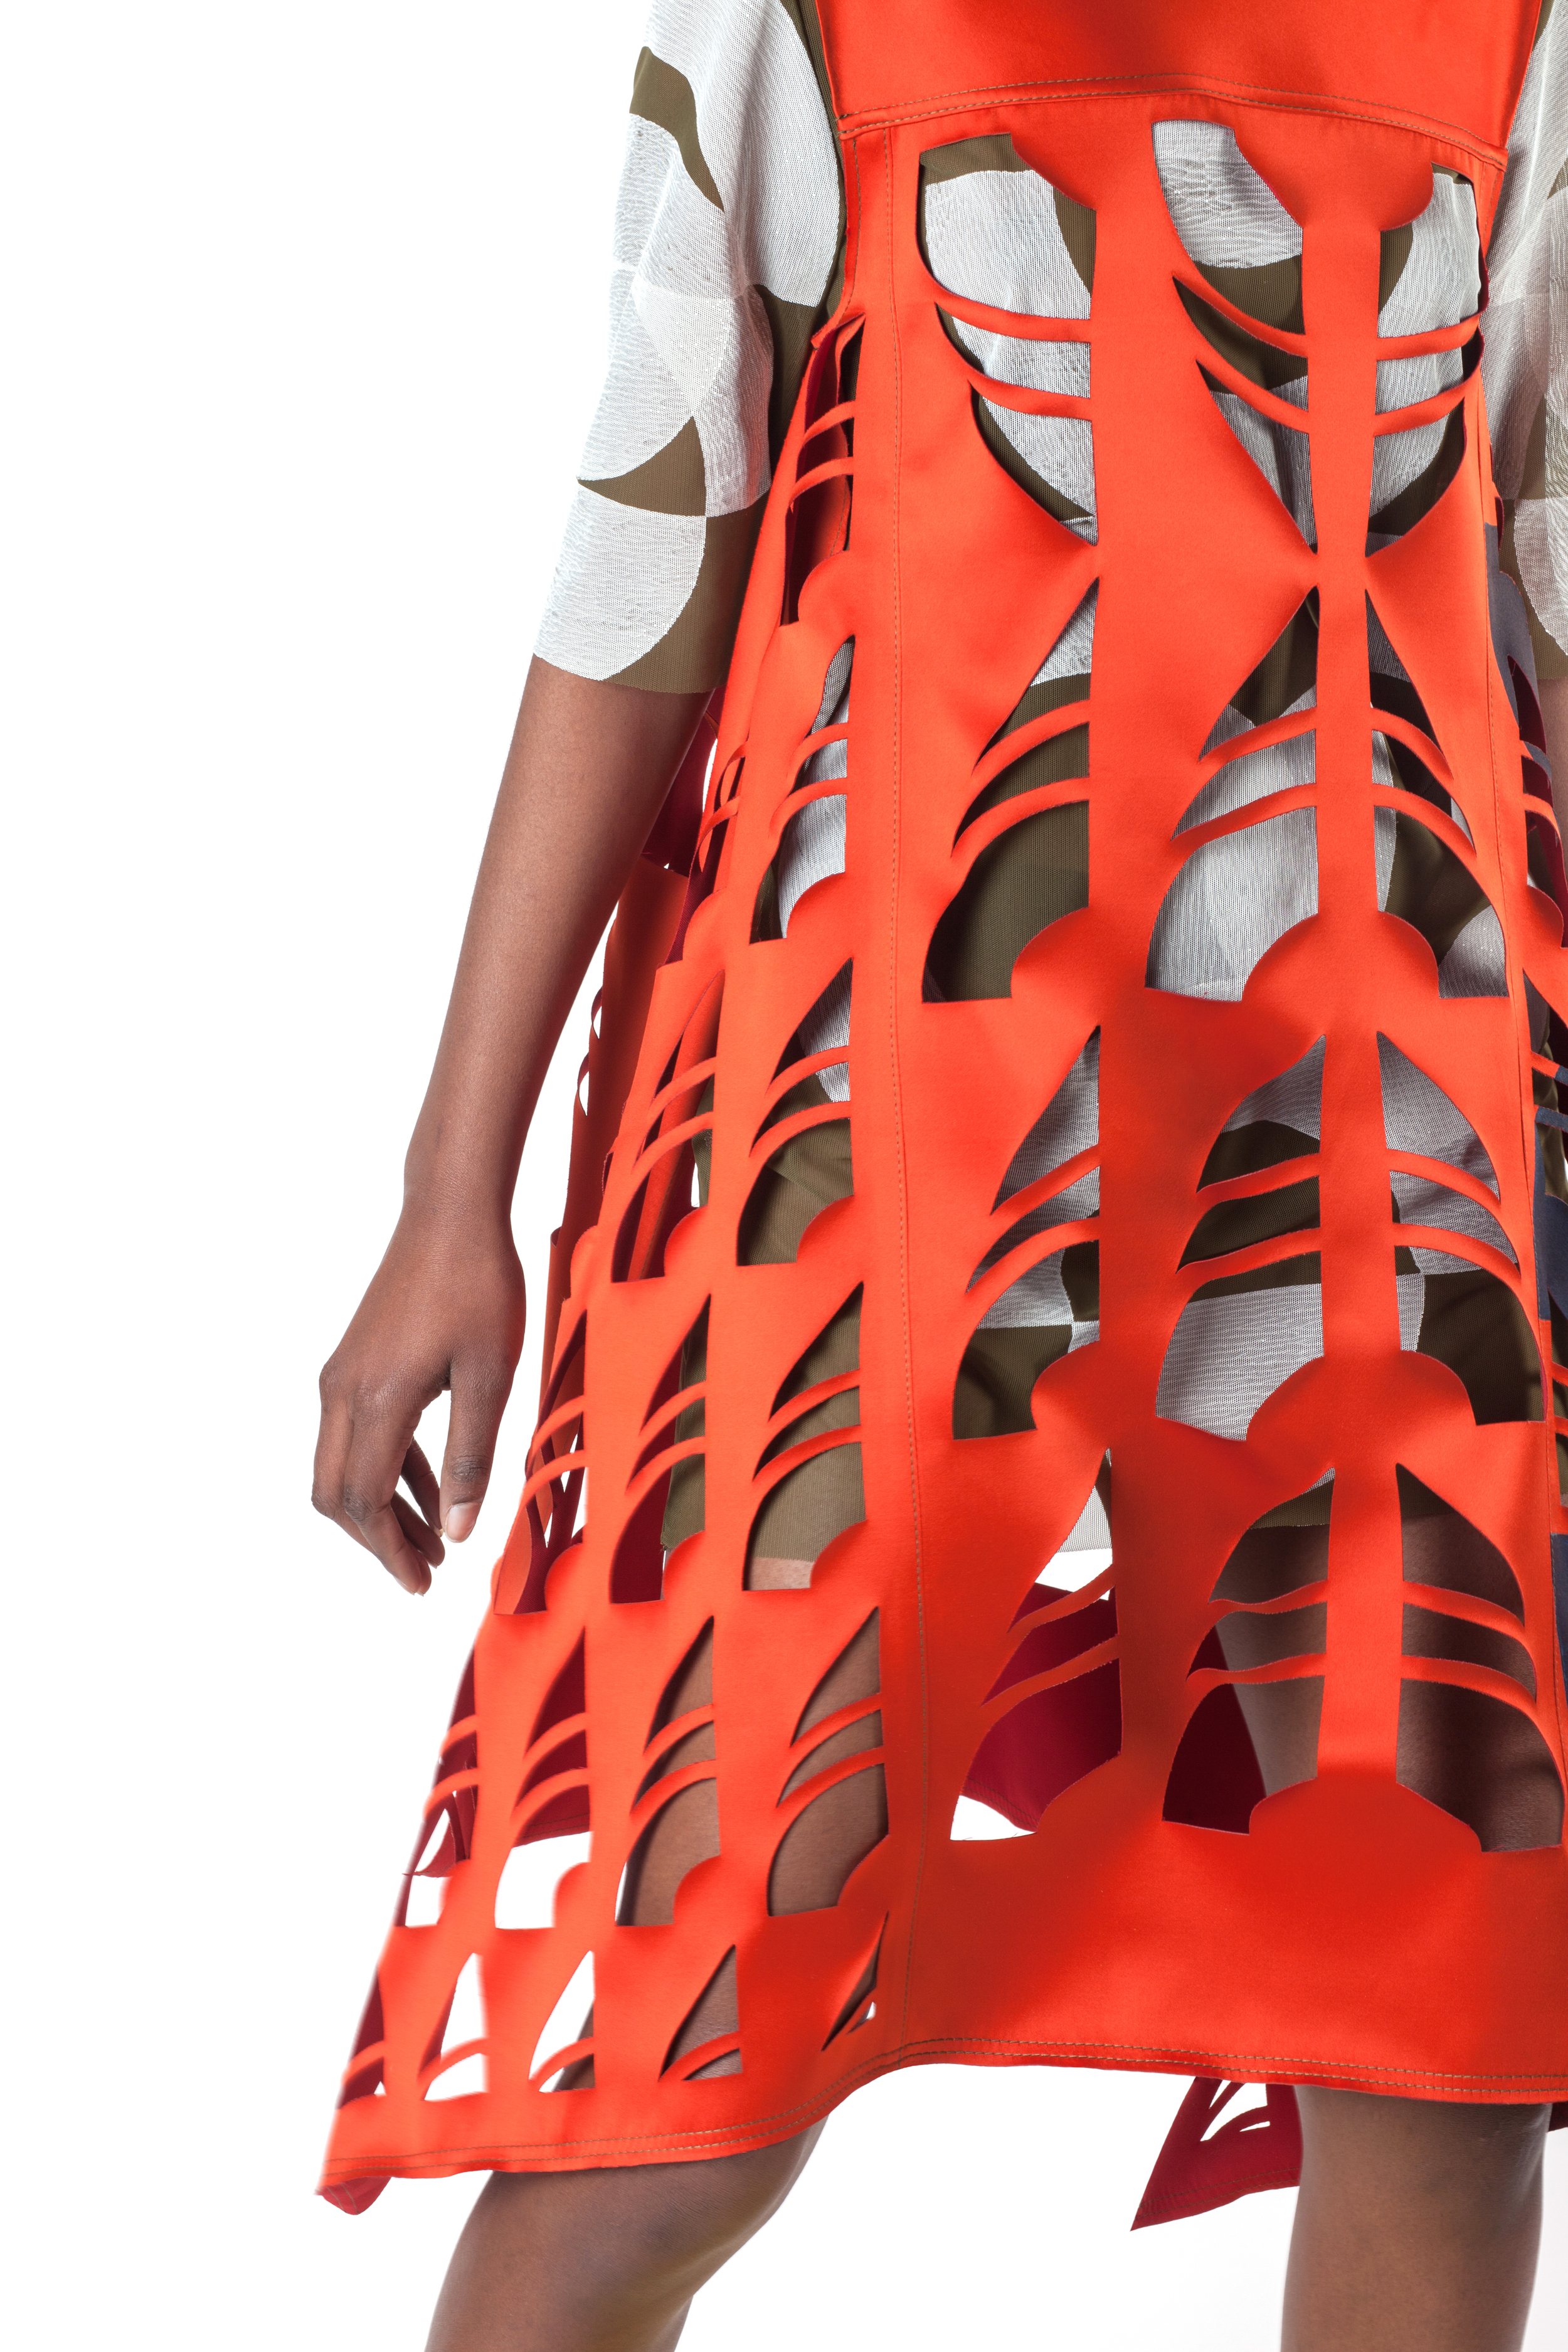  Block Printed Mesh Tee Dress under a Block Printed Laser Cut Double Faced Poly Satin Dress 